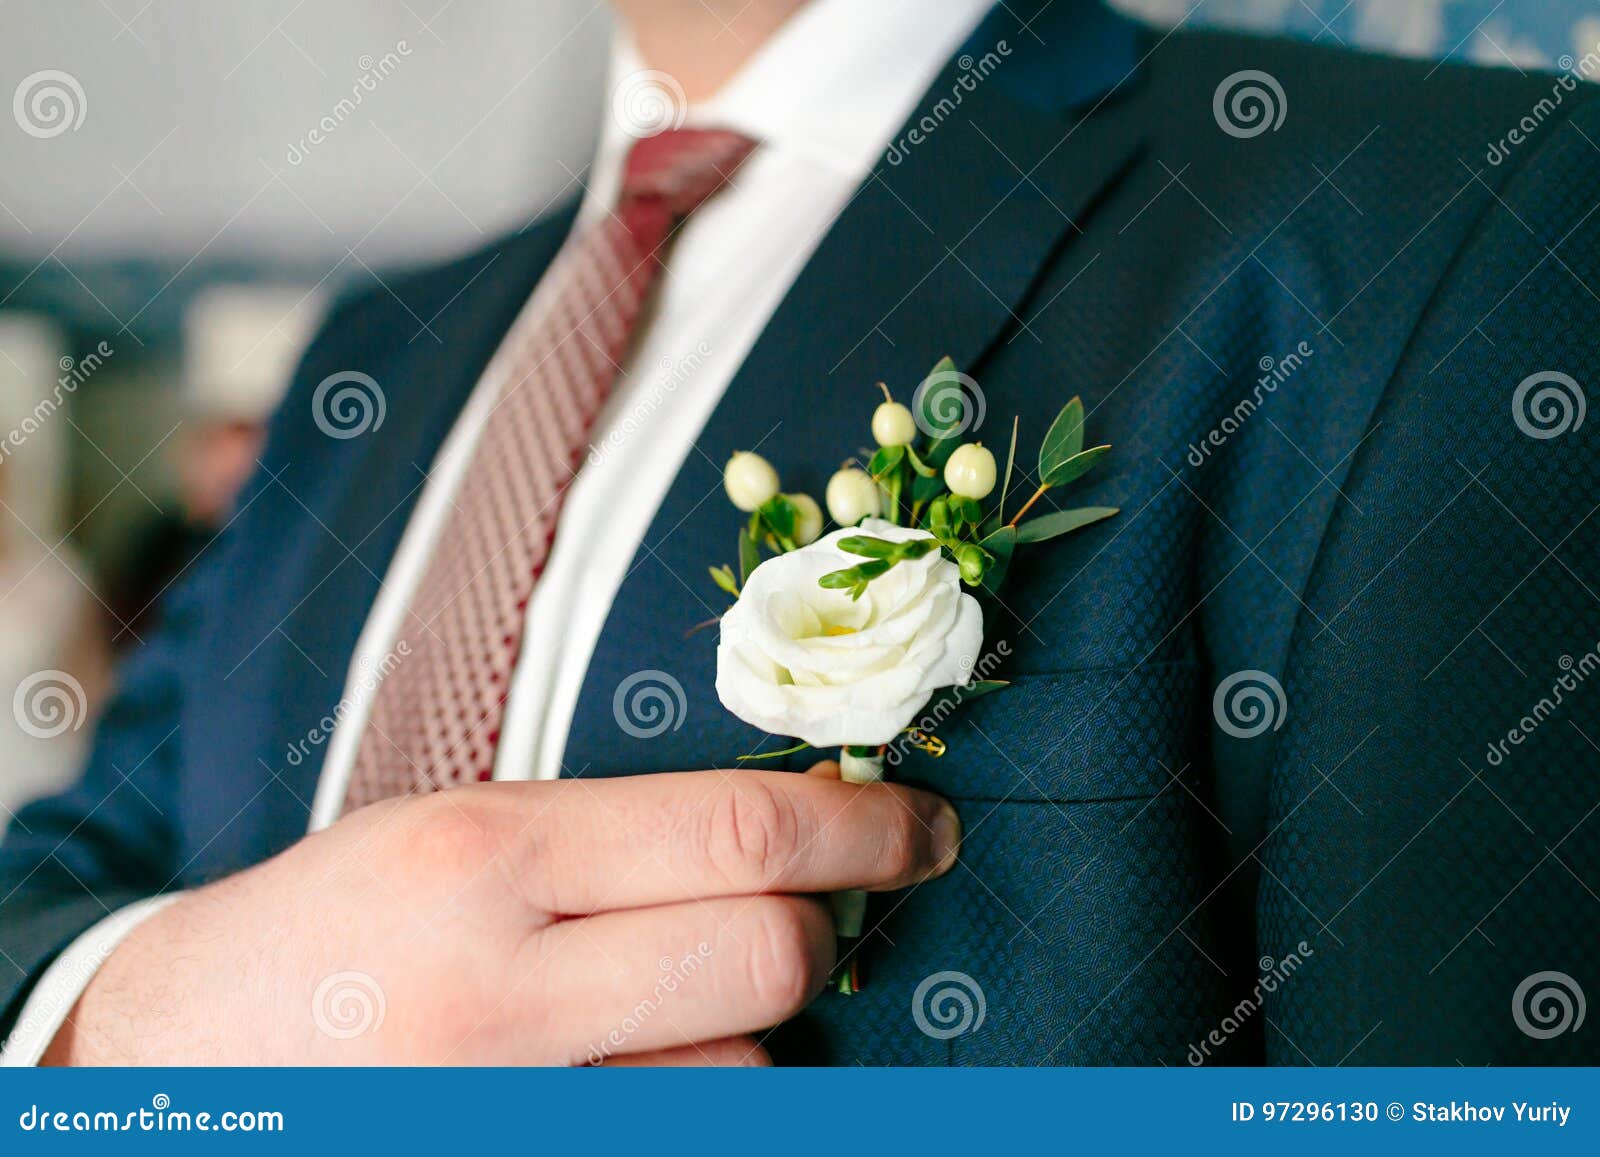 groom is pinning a boutonniere to a suit. wedding preparation